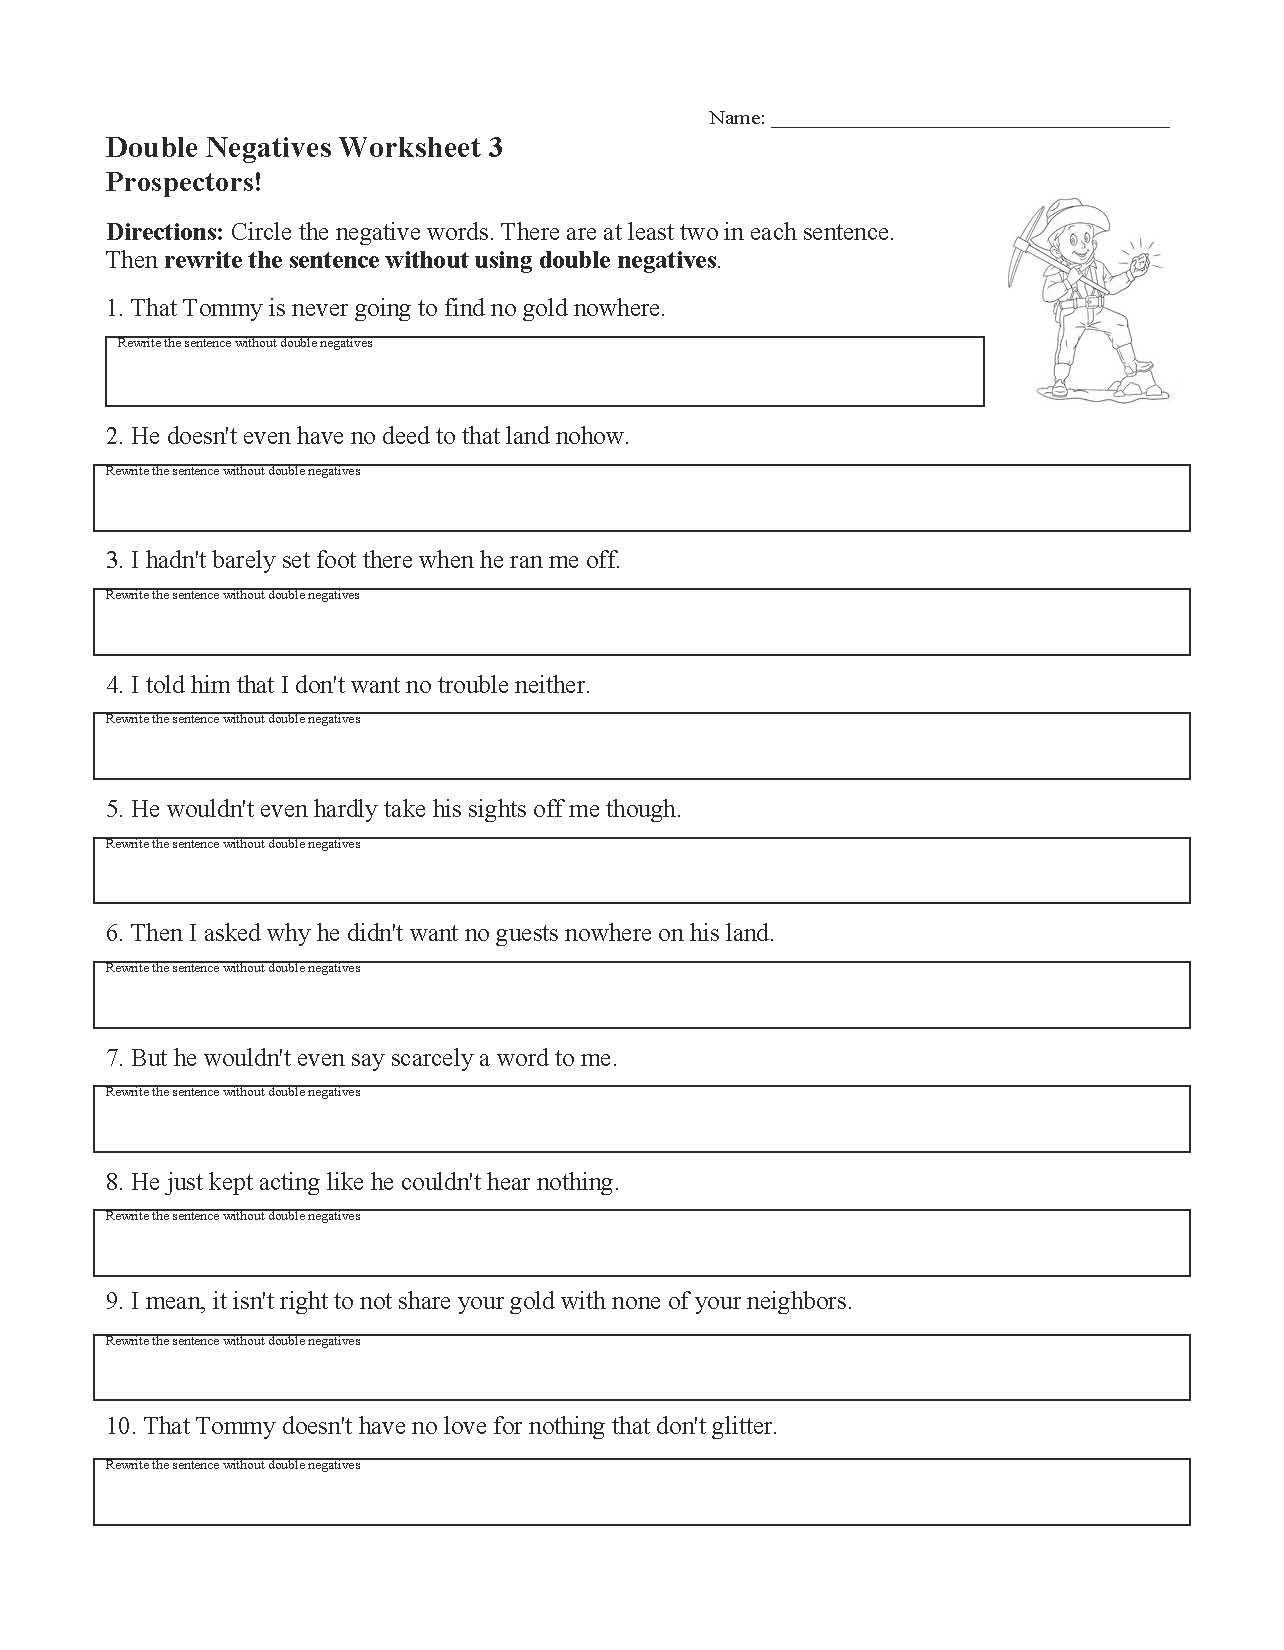 This is a preview image of Double Negatives Worksheet 3. Click on it to enlarge it or view the source file.